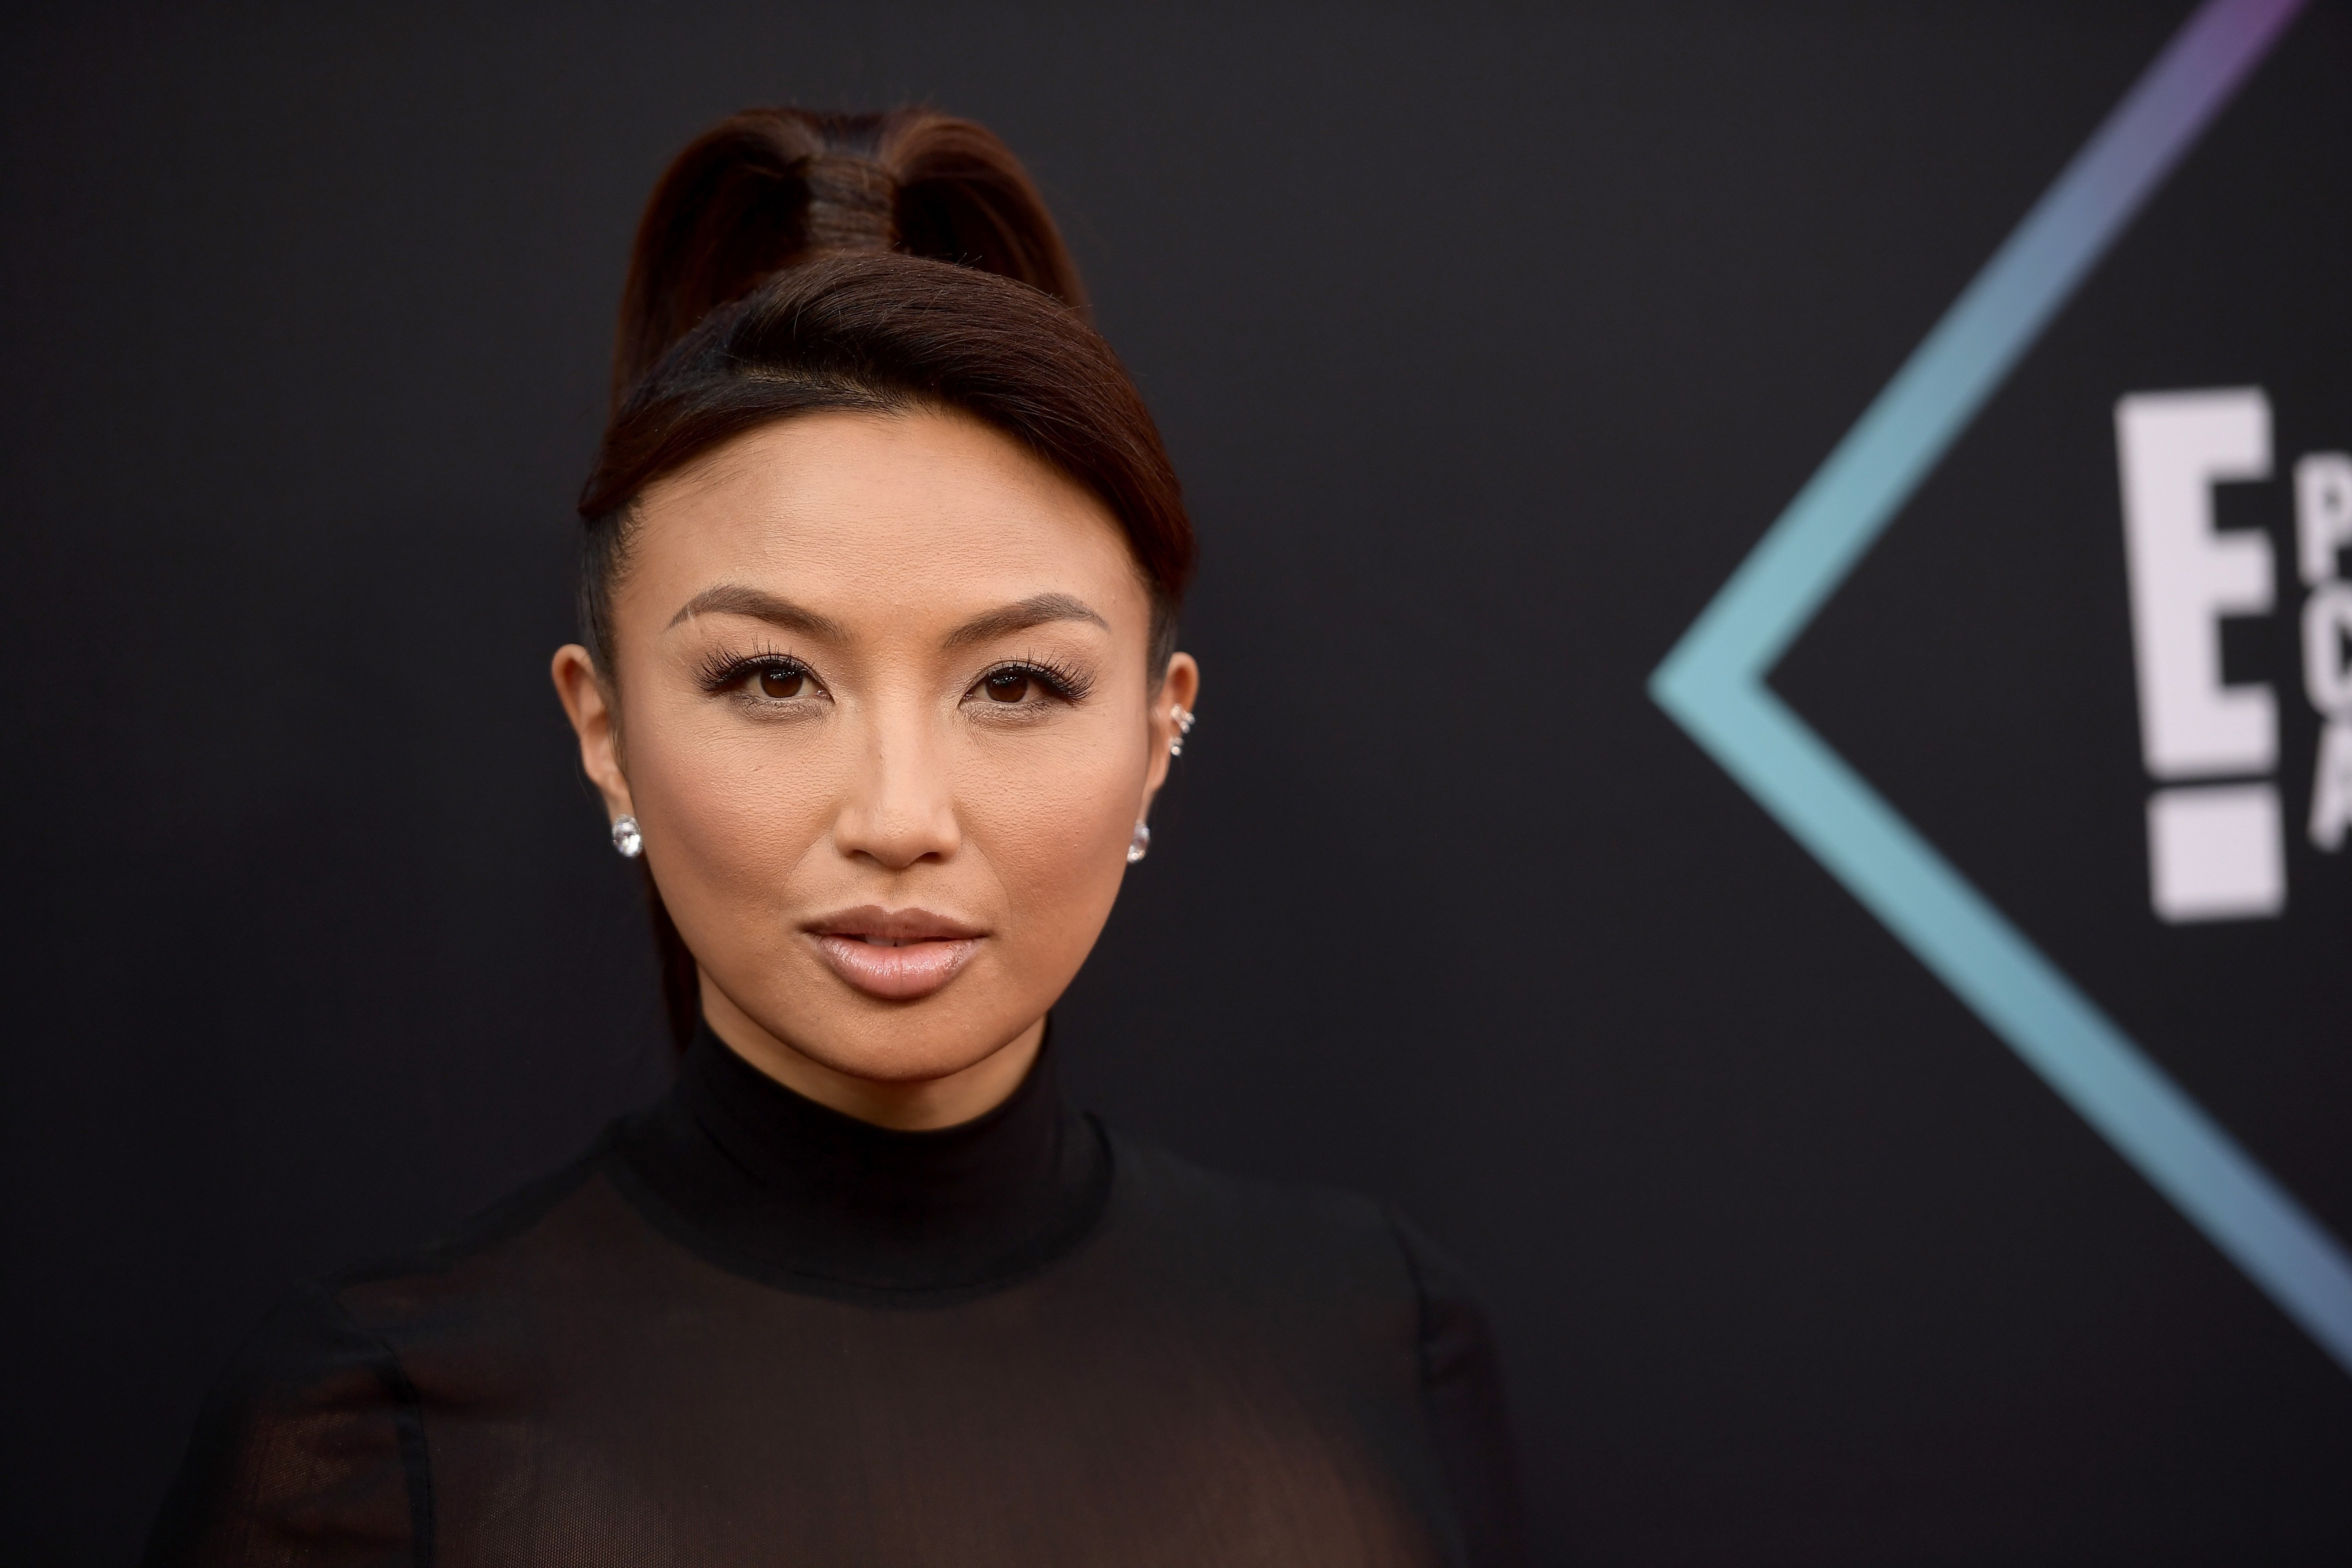 Jeannie Mai attends the People's Choice Awards 2018 at Barker Hangar on November 11, 2018. | Photo: Getty Images